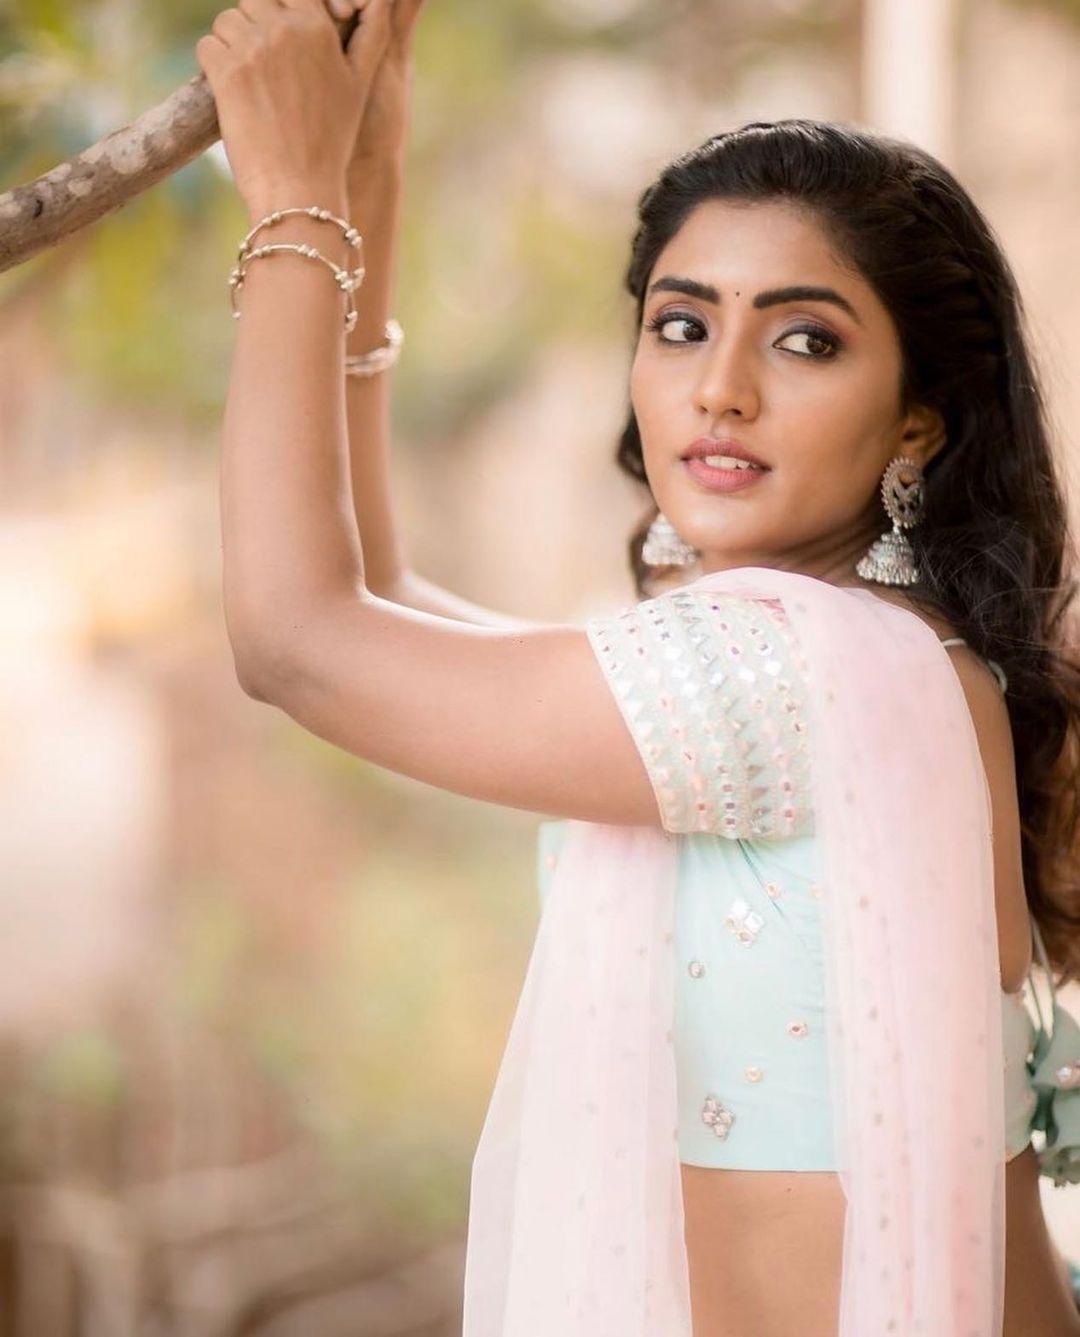 Esha Rebba Ned Sex - South Indian actress Eesha Rebba in half saree hot photos | looking very  glamorous photos Photos: HD Images, Pictures, Stills, First Look Posters of  South Indian actress Eesha Rebba in half saree